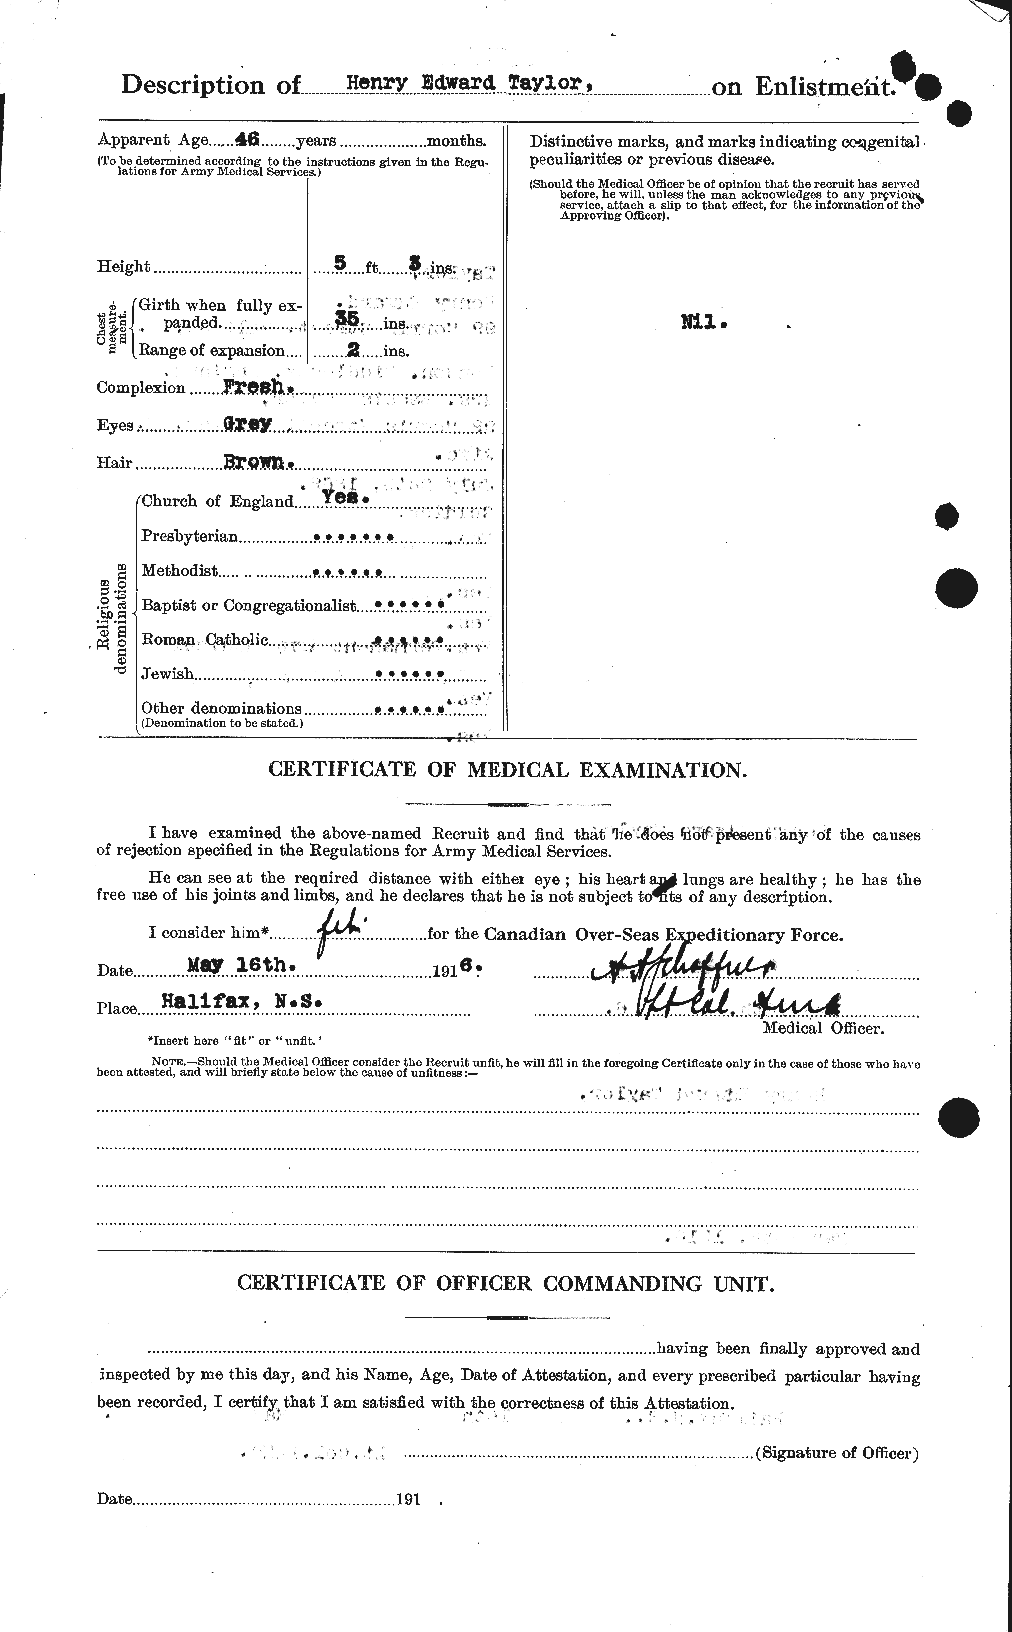 Personnel Records of the First World War - CEF 626535b